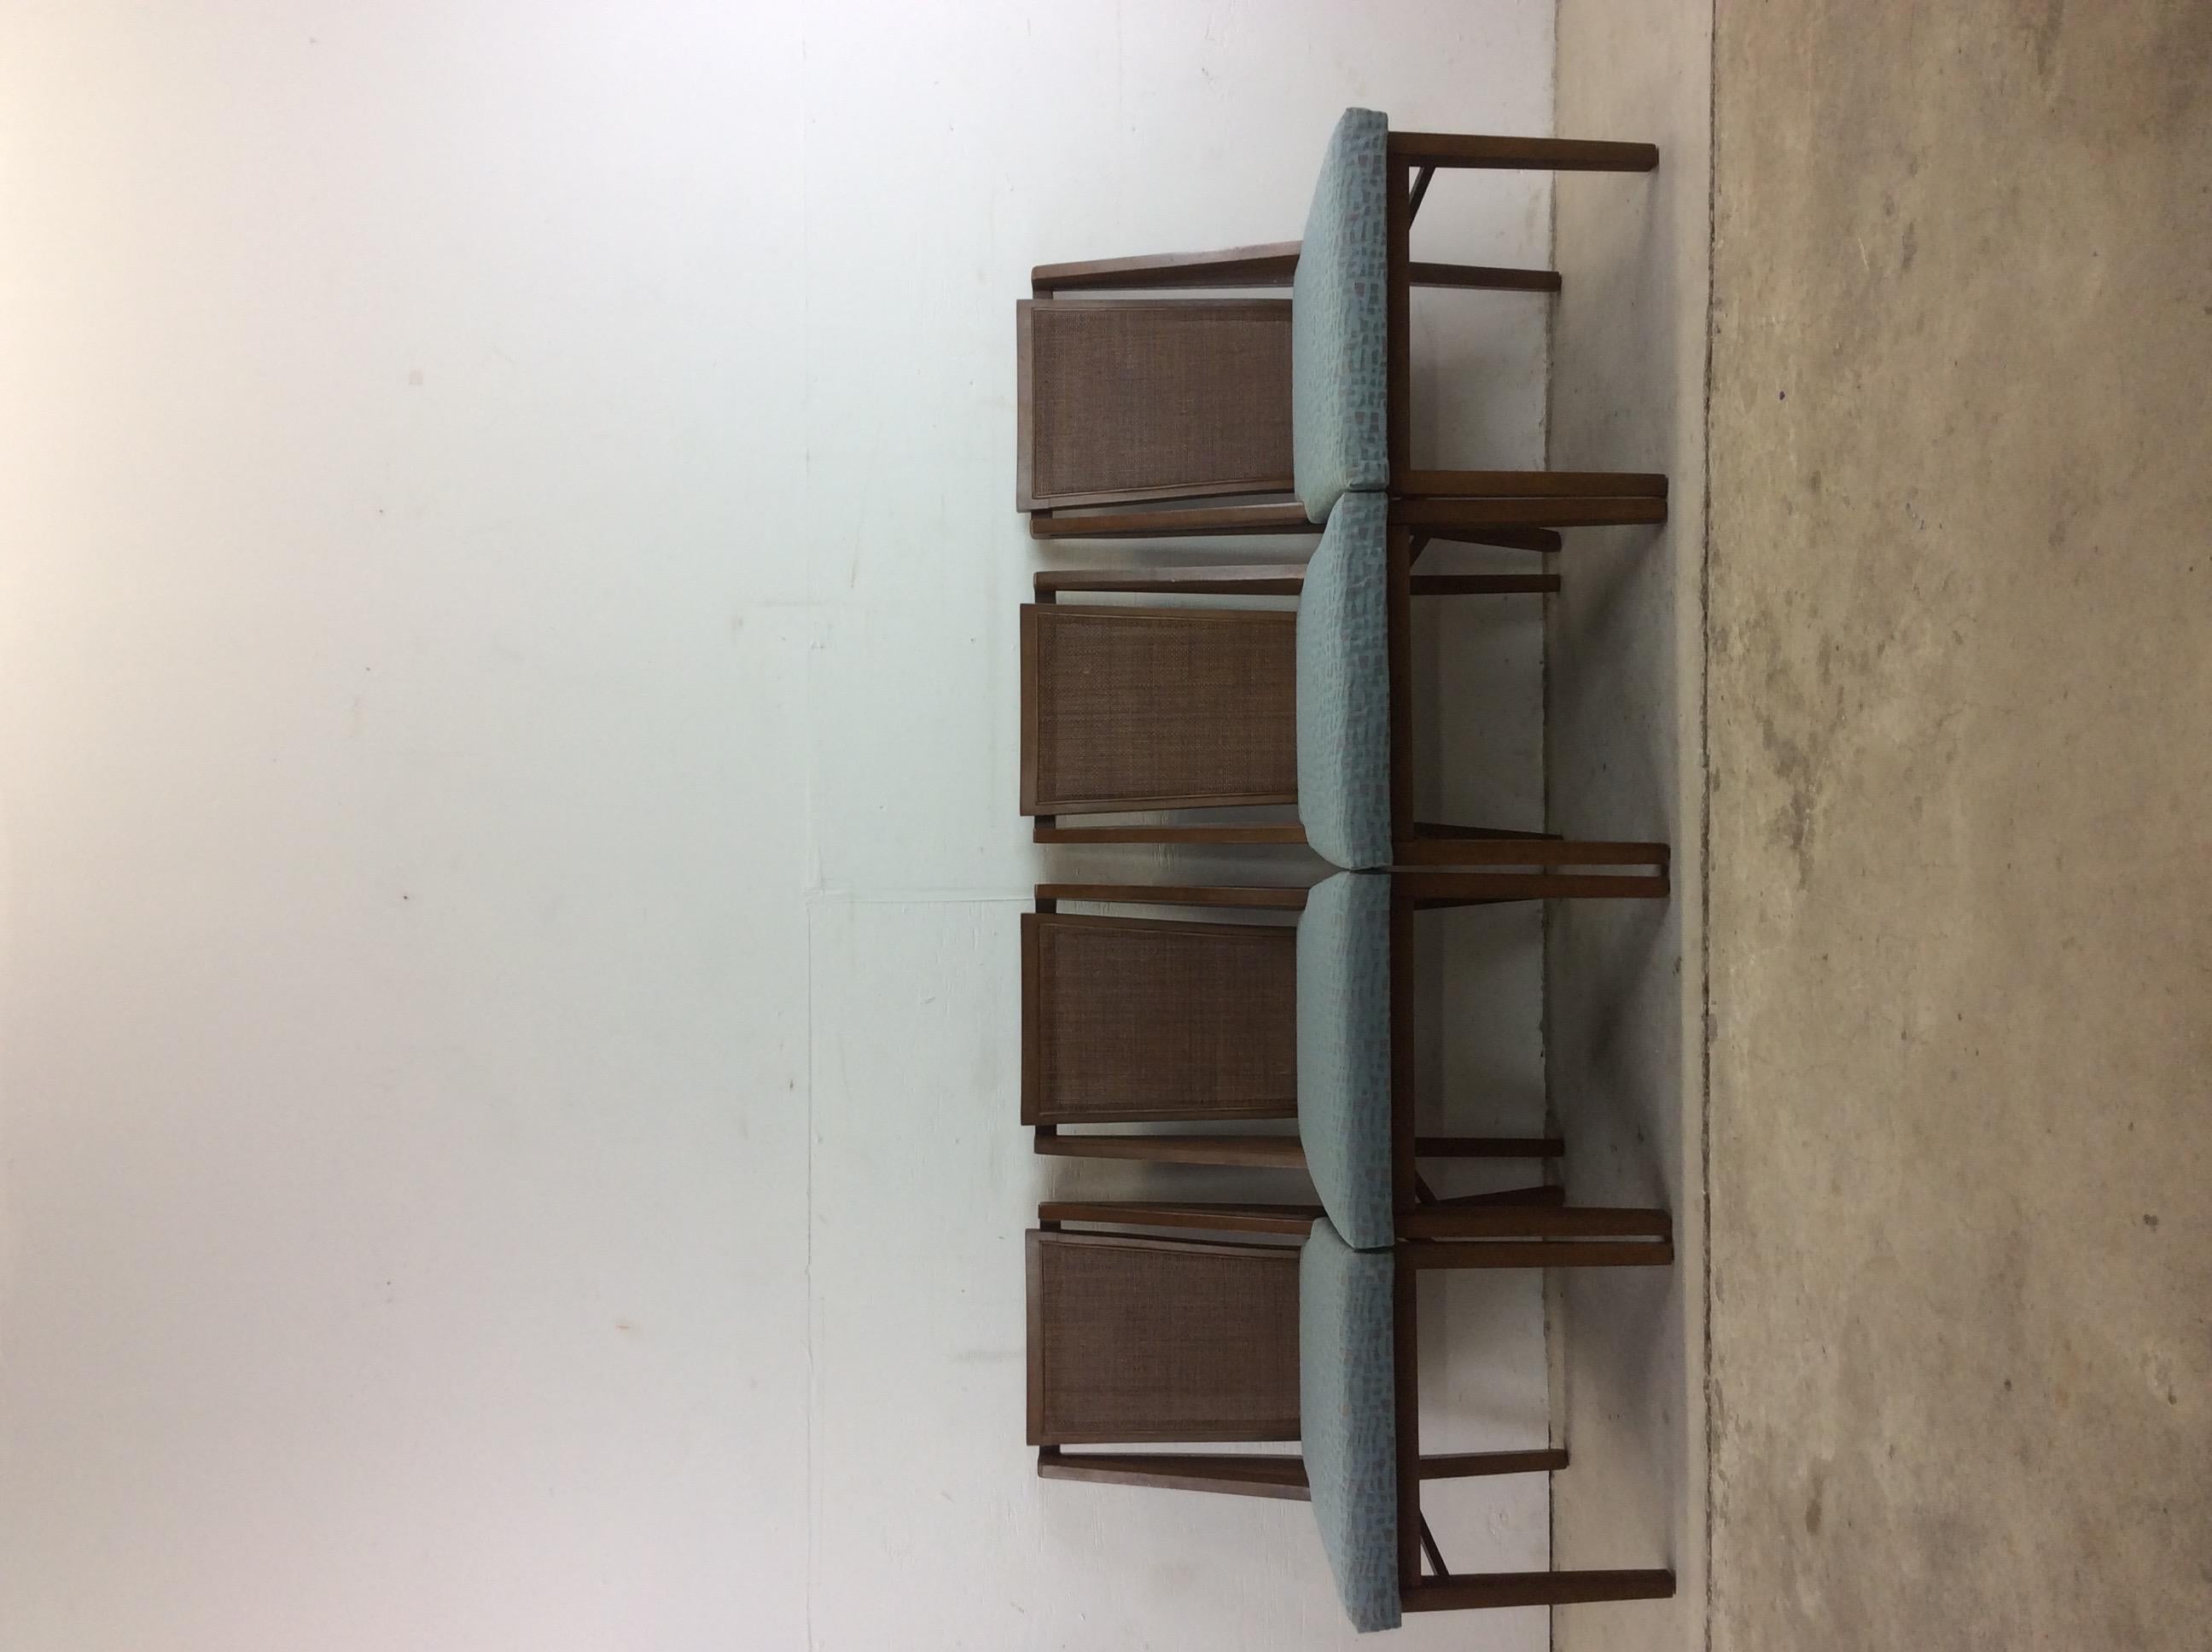 American Set of 4 Mid-Century Modern Dining Room Chairs by Drexel For Sale